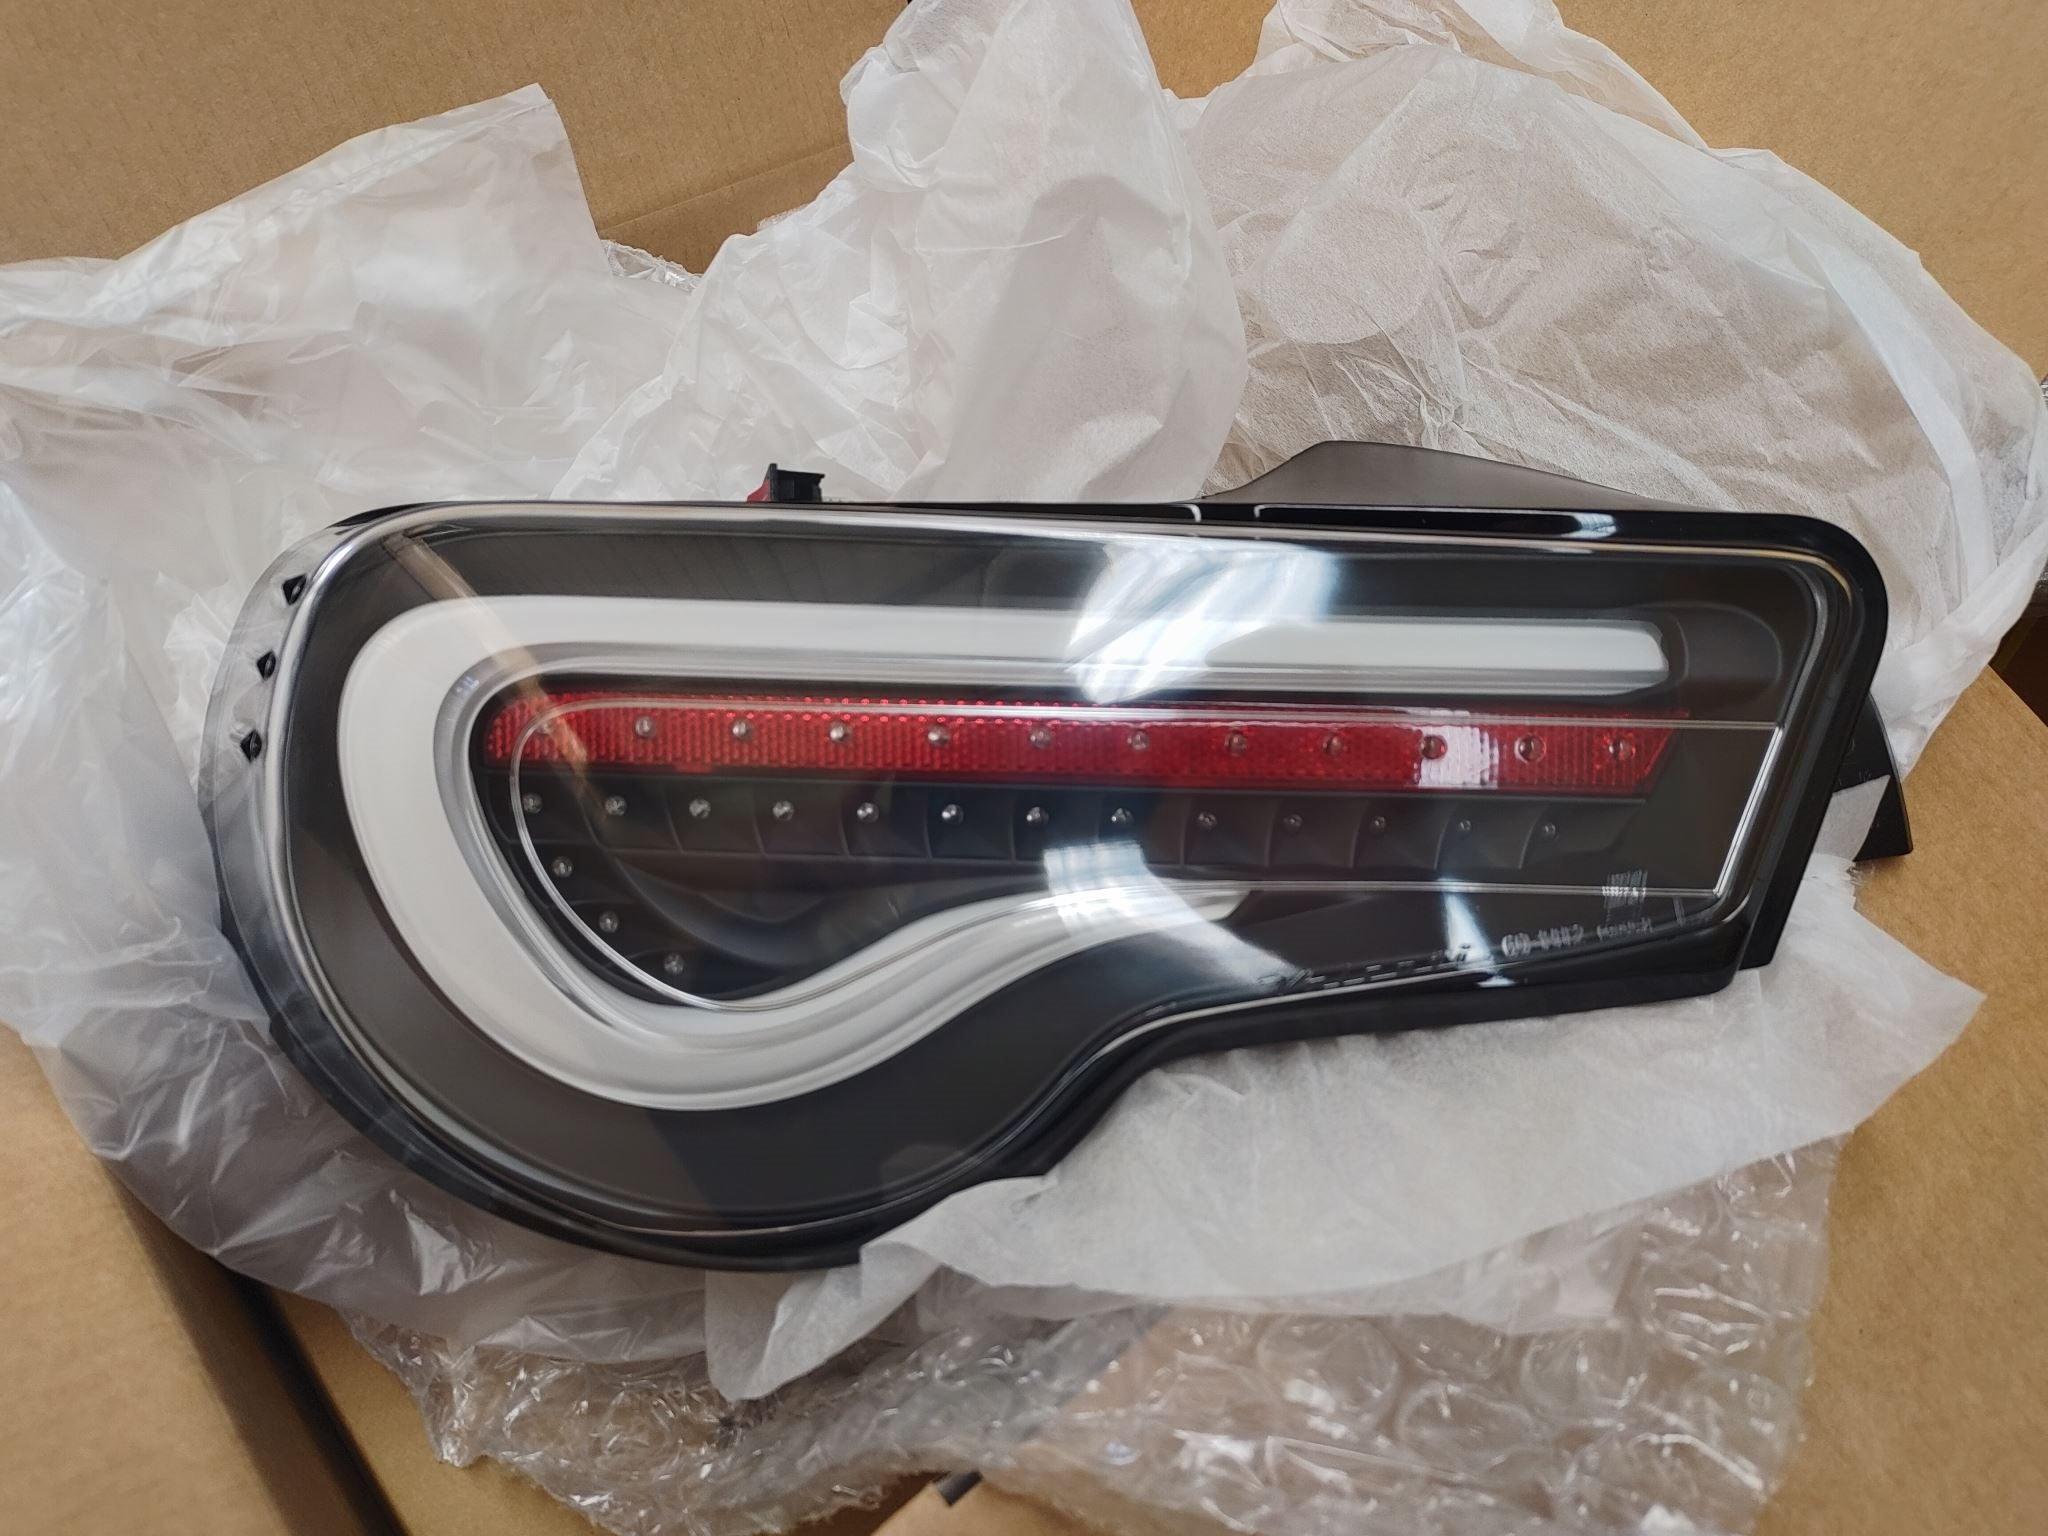 Valenti Hyper-Black Full LED Taillights to suit 86 BRZ SQ indicator 3DTail LightsProlink Performance